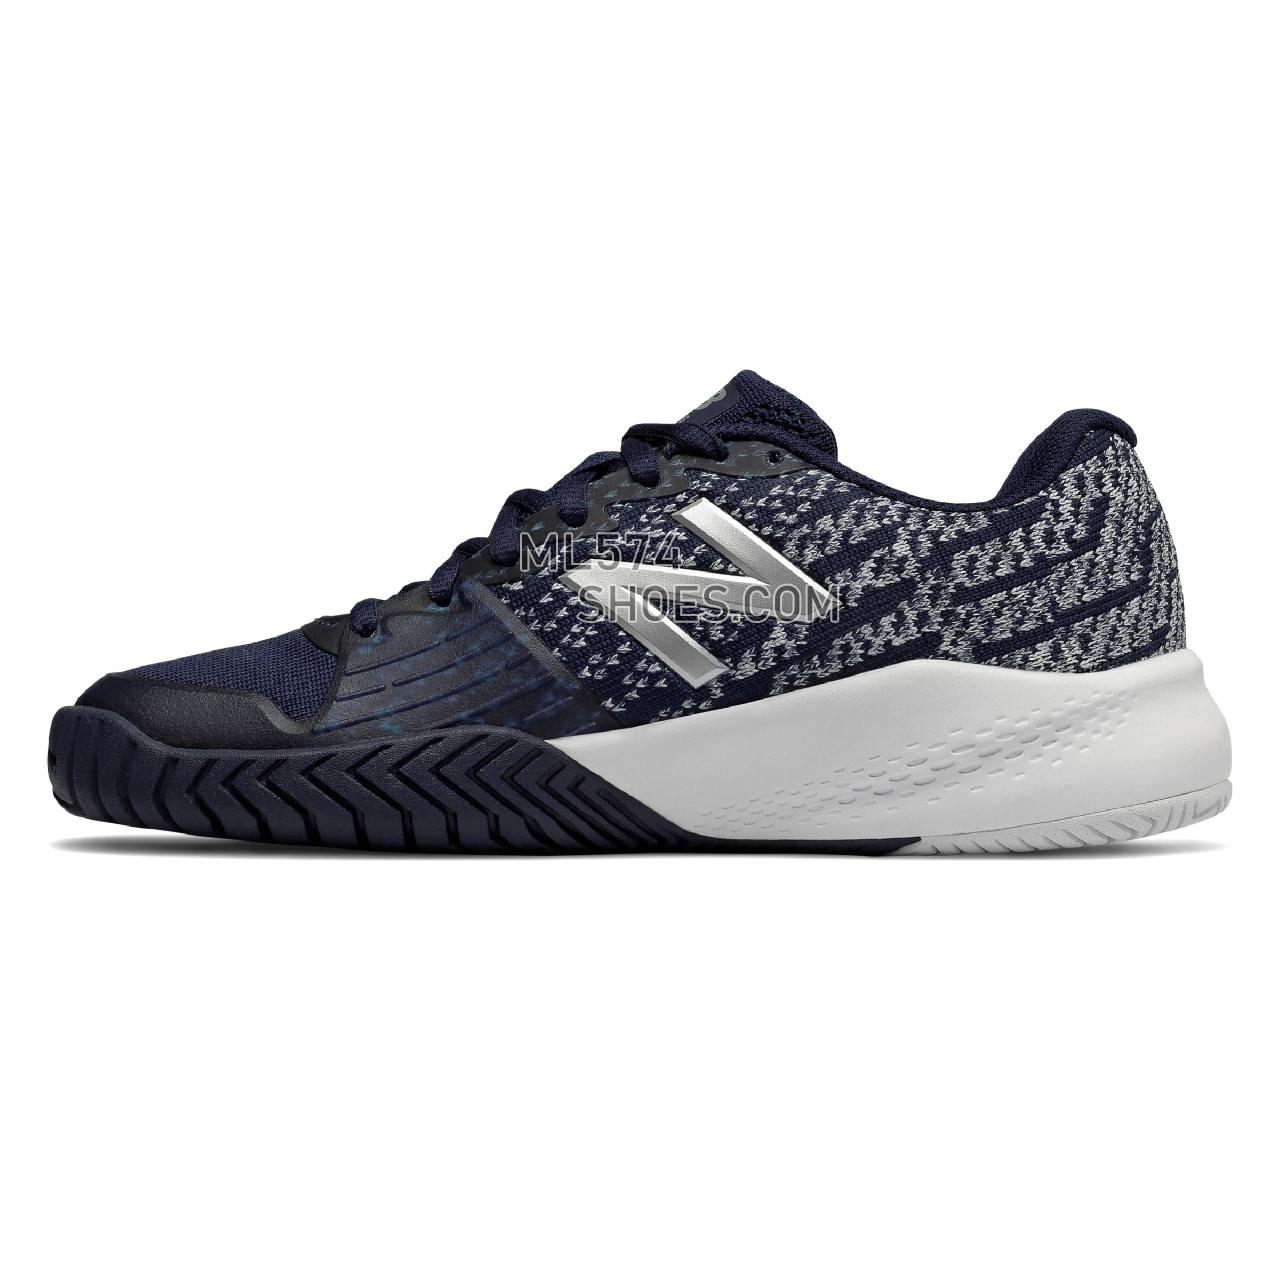 New Balance 996v3 - Women's 996 - Tennis / Court Pigment with White - WCH996N3